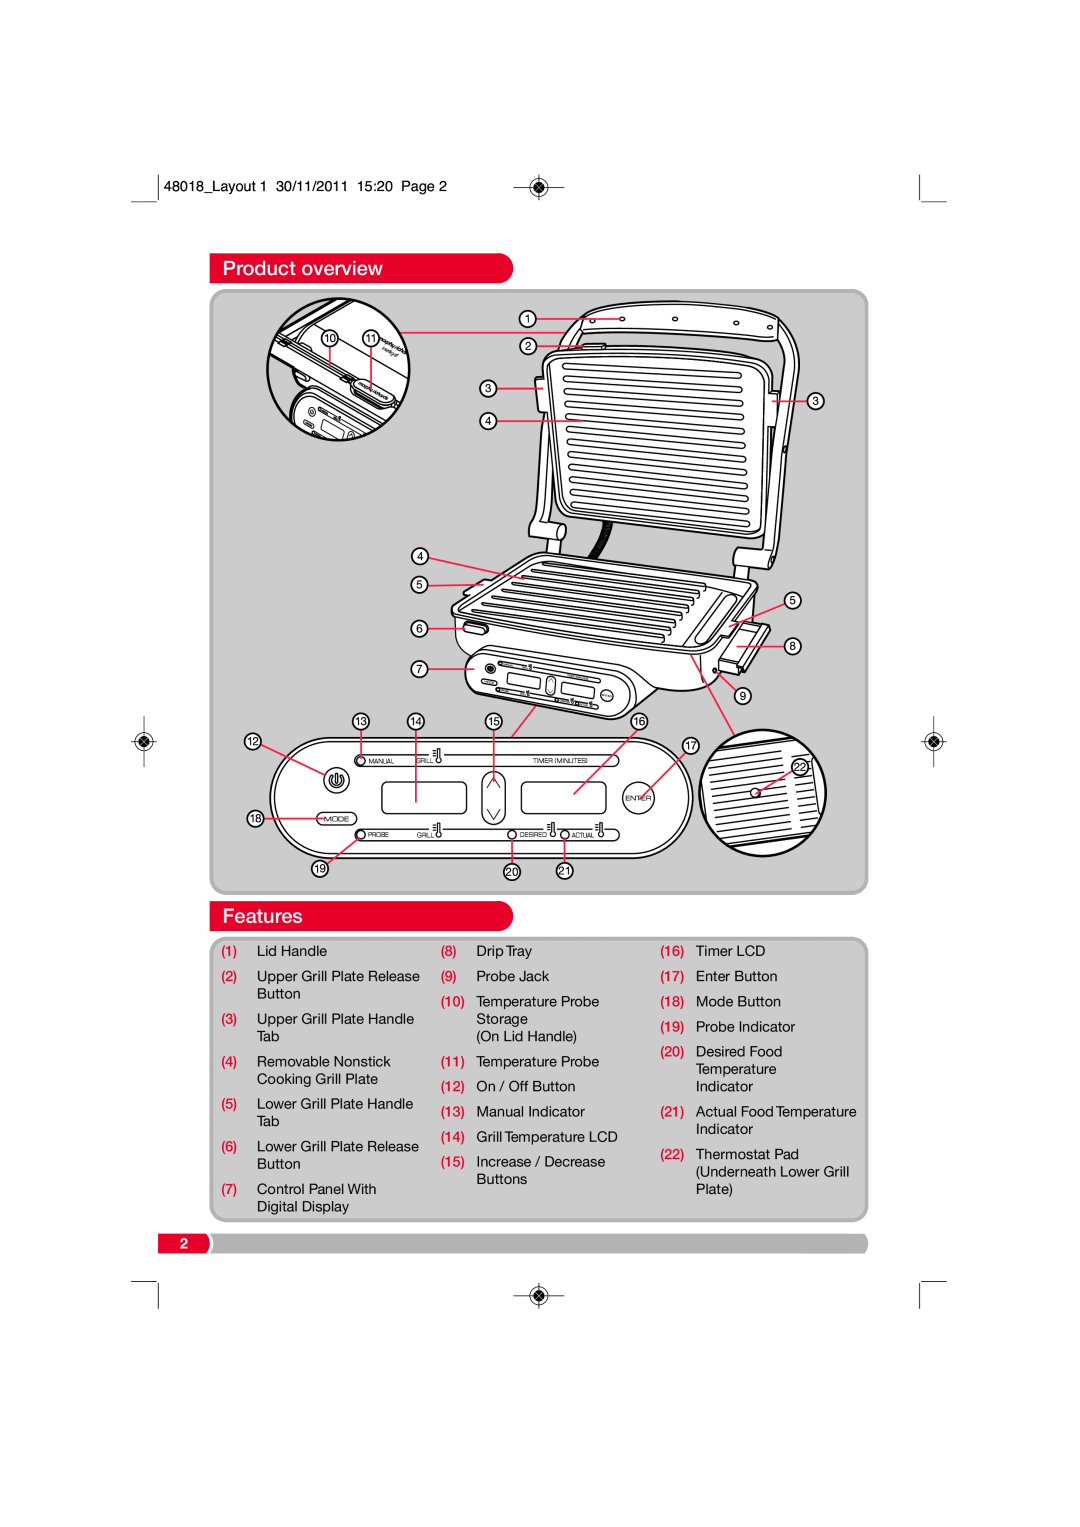 Morphy Richards ST48018 MUK Rev 1 manual Product overview, Features 